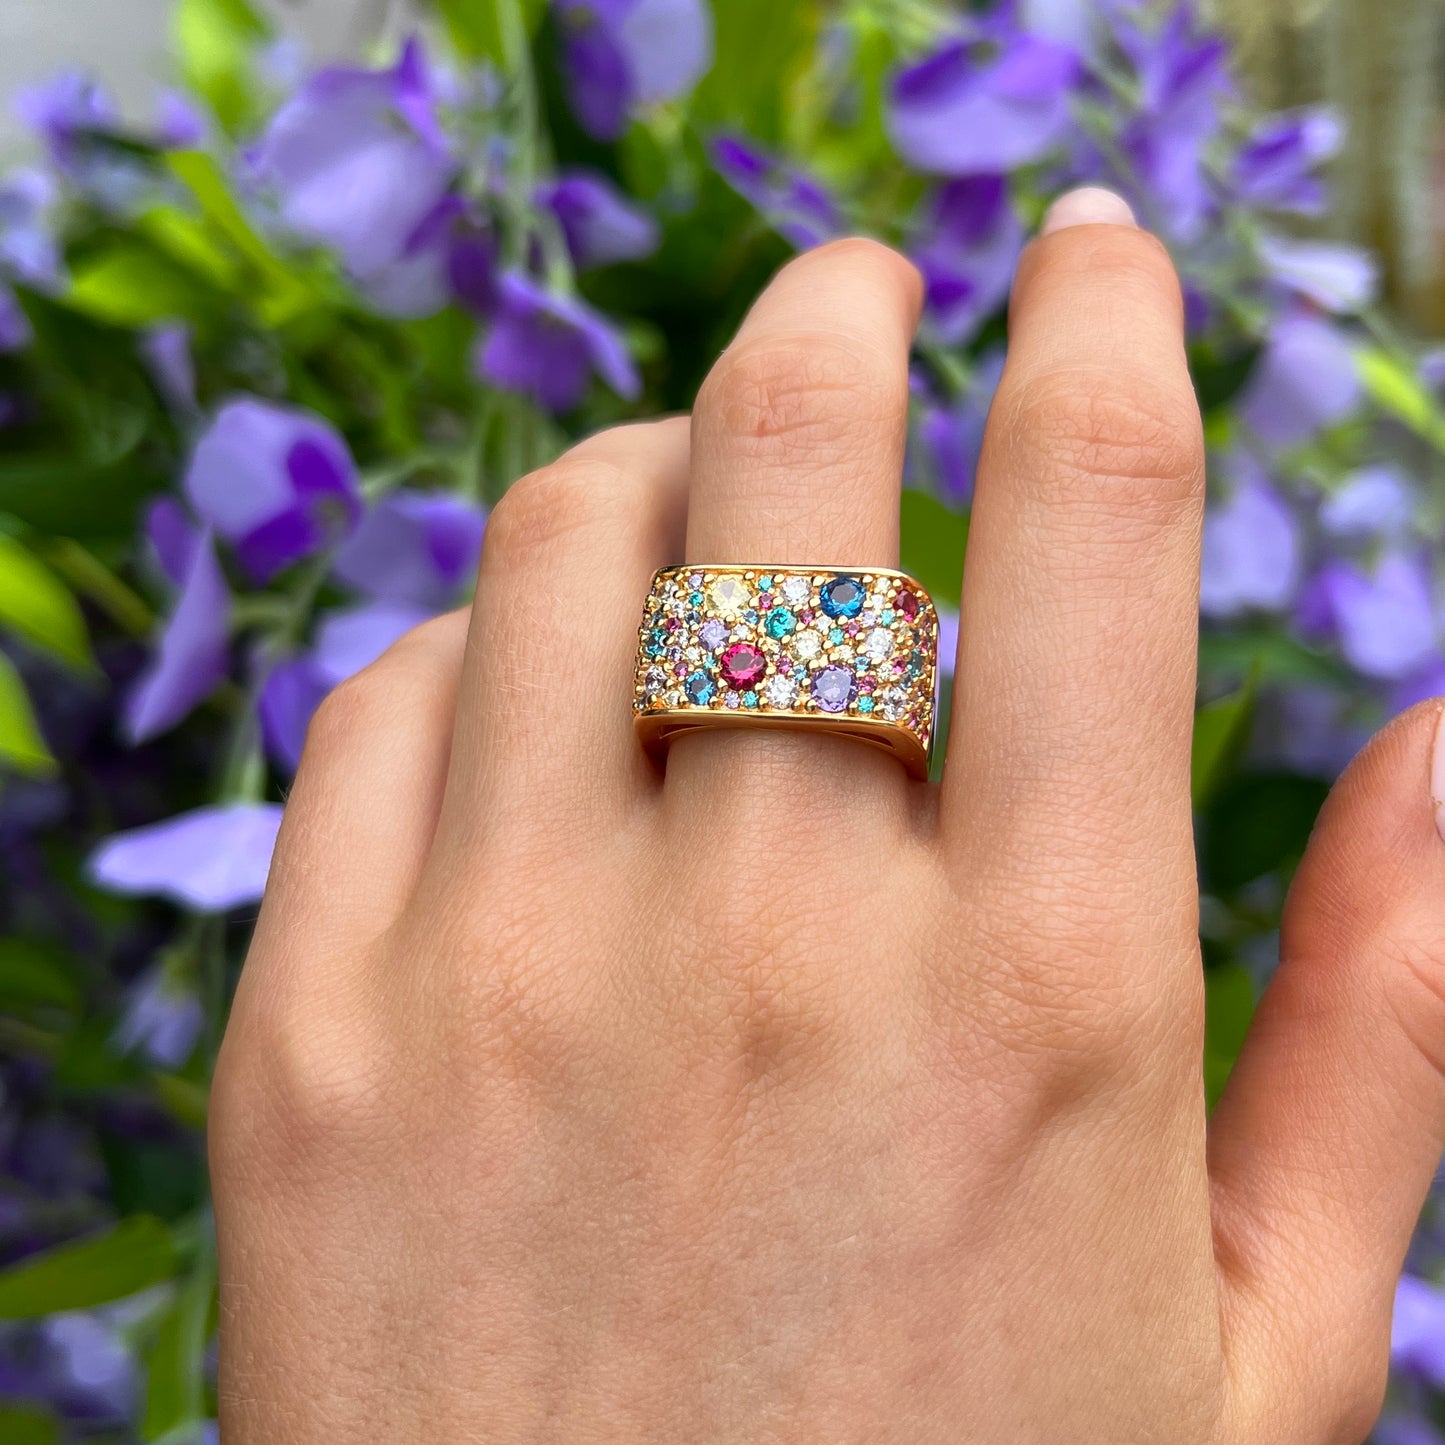 Sif Jakobs Novara Quadrato Ring - 18ct Gold Plated Sterling Silver with Multicoloured Zirconia - Size Q